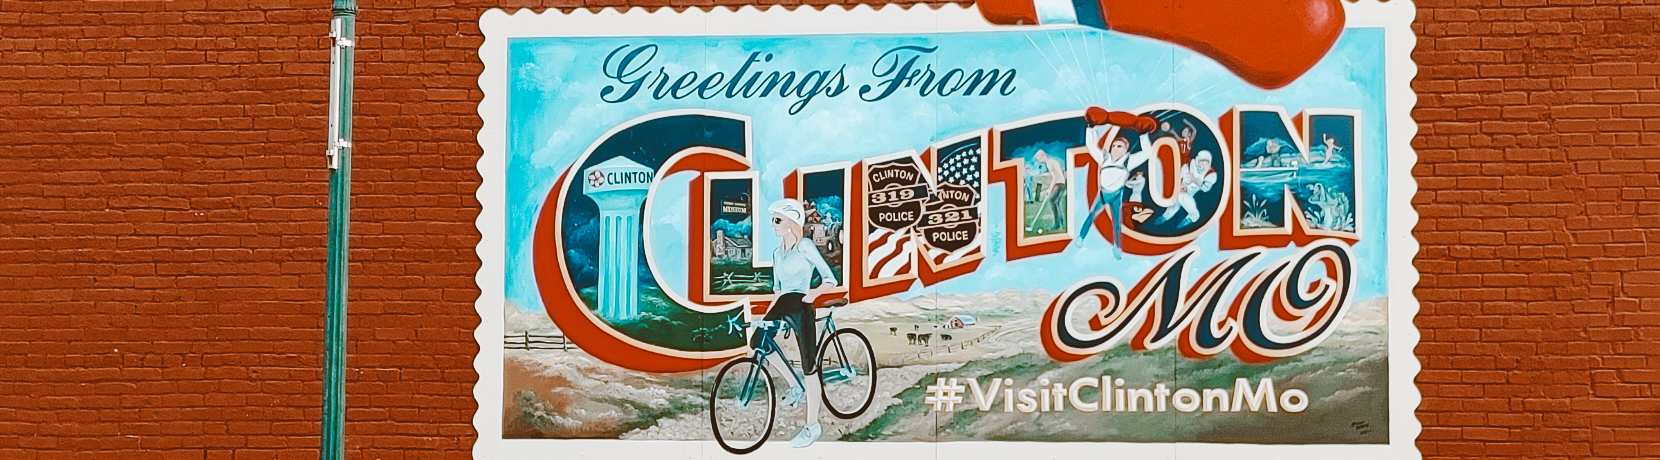 Postcard that says "Greetings from Clinton Missouri"